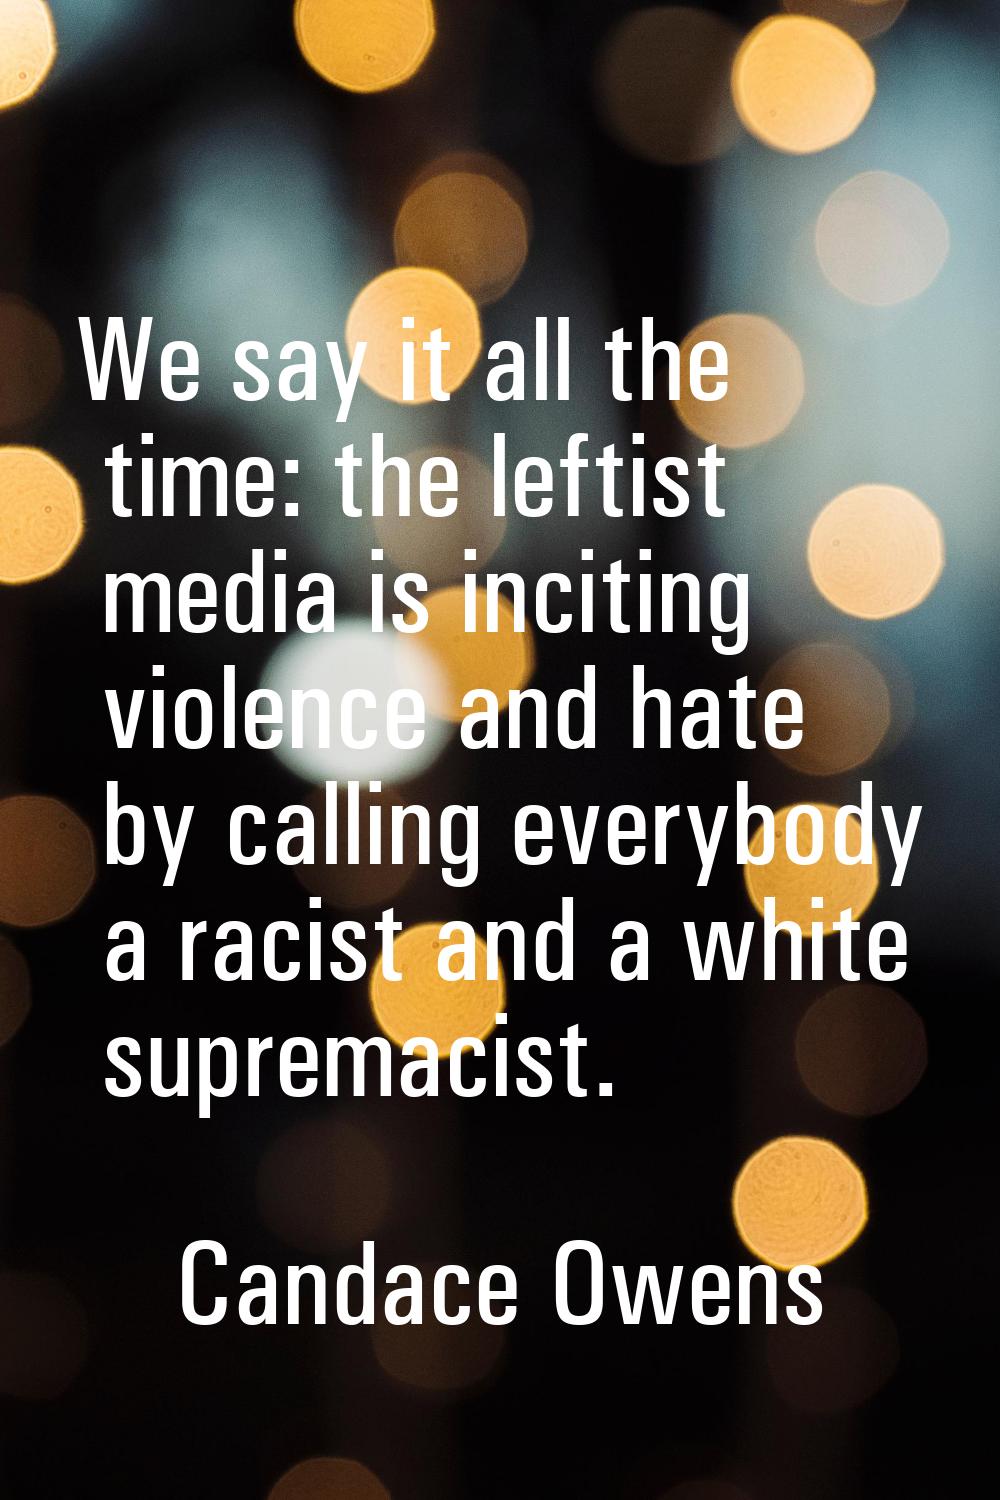 We say it all the time: the leftist media is inciting violence and hate by calling everybody a raci